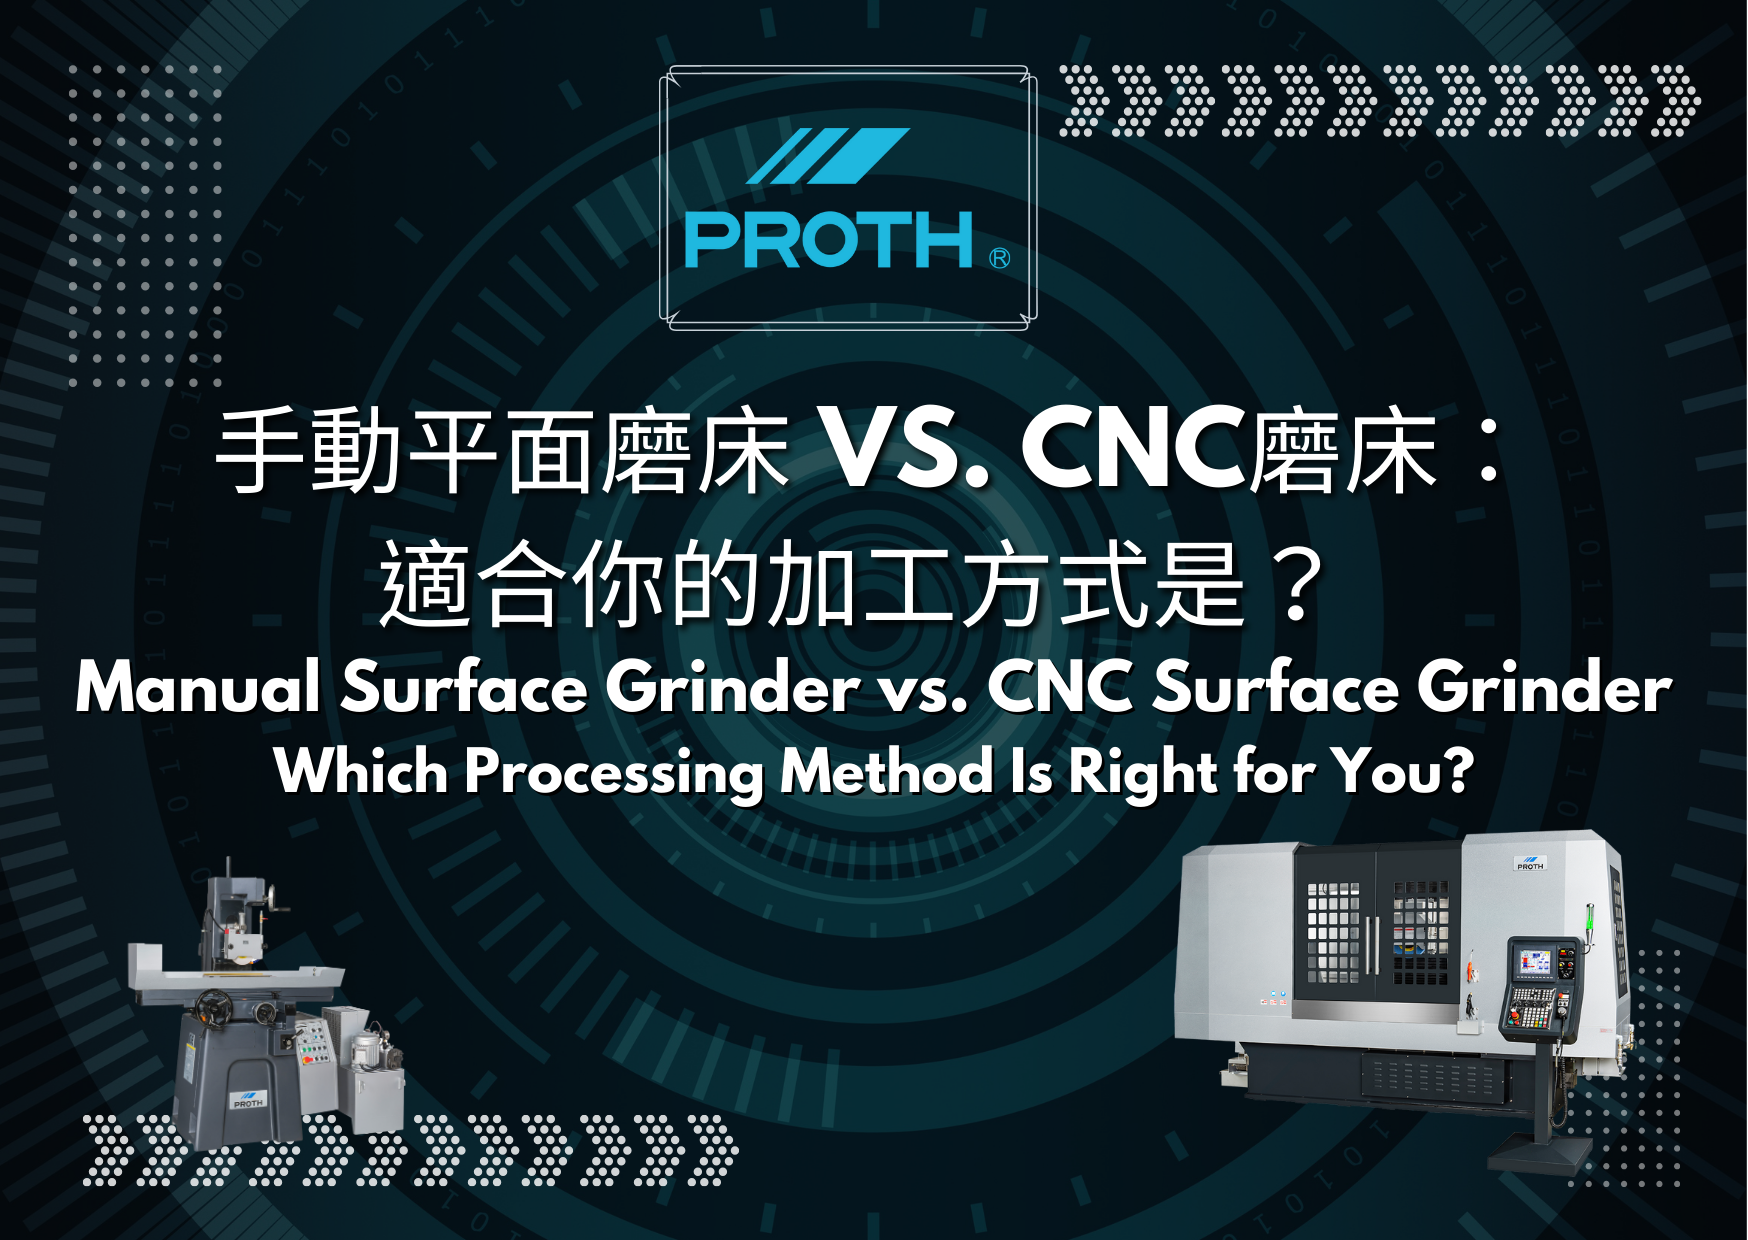 News|Manual Surface Grinder vs. CNC Grinder: Which Processing Method Is Right for You?